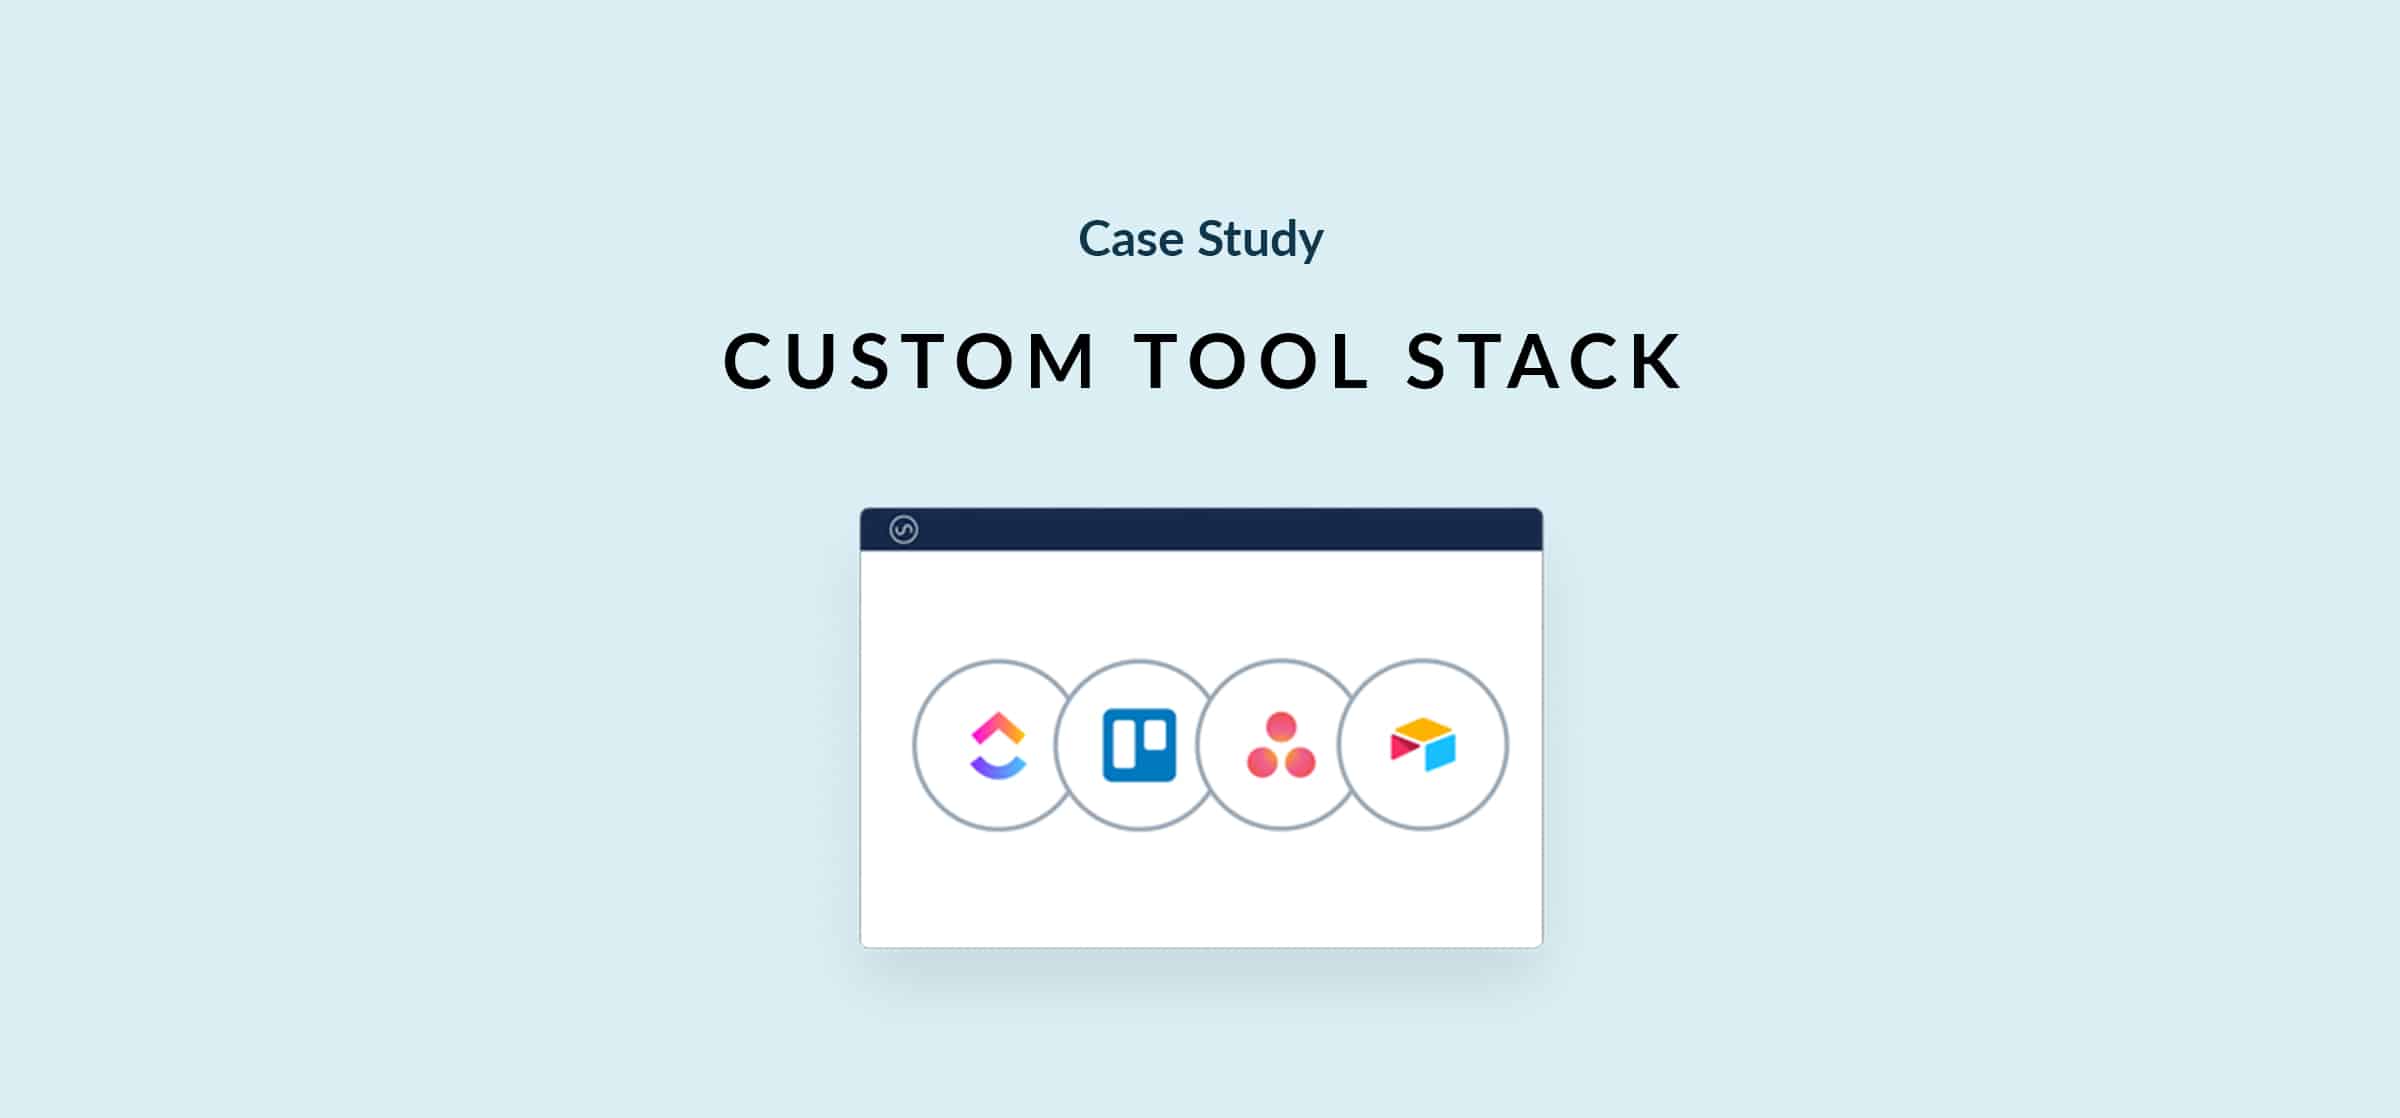 Logos for ClickUp, Trello, Asana, and Airtable, with the words Custom Tool Stack in bold.